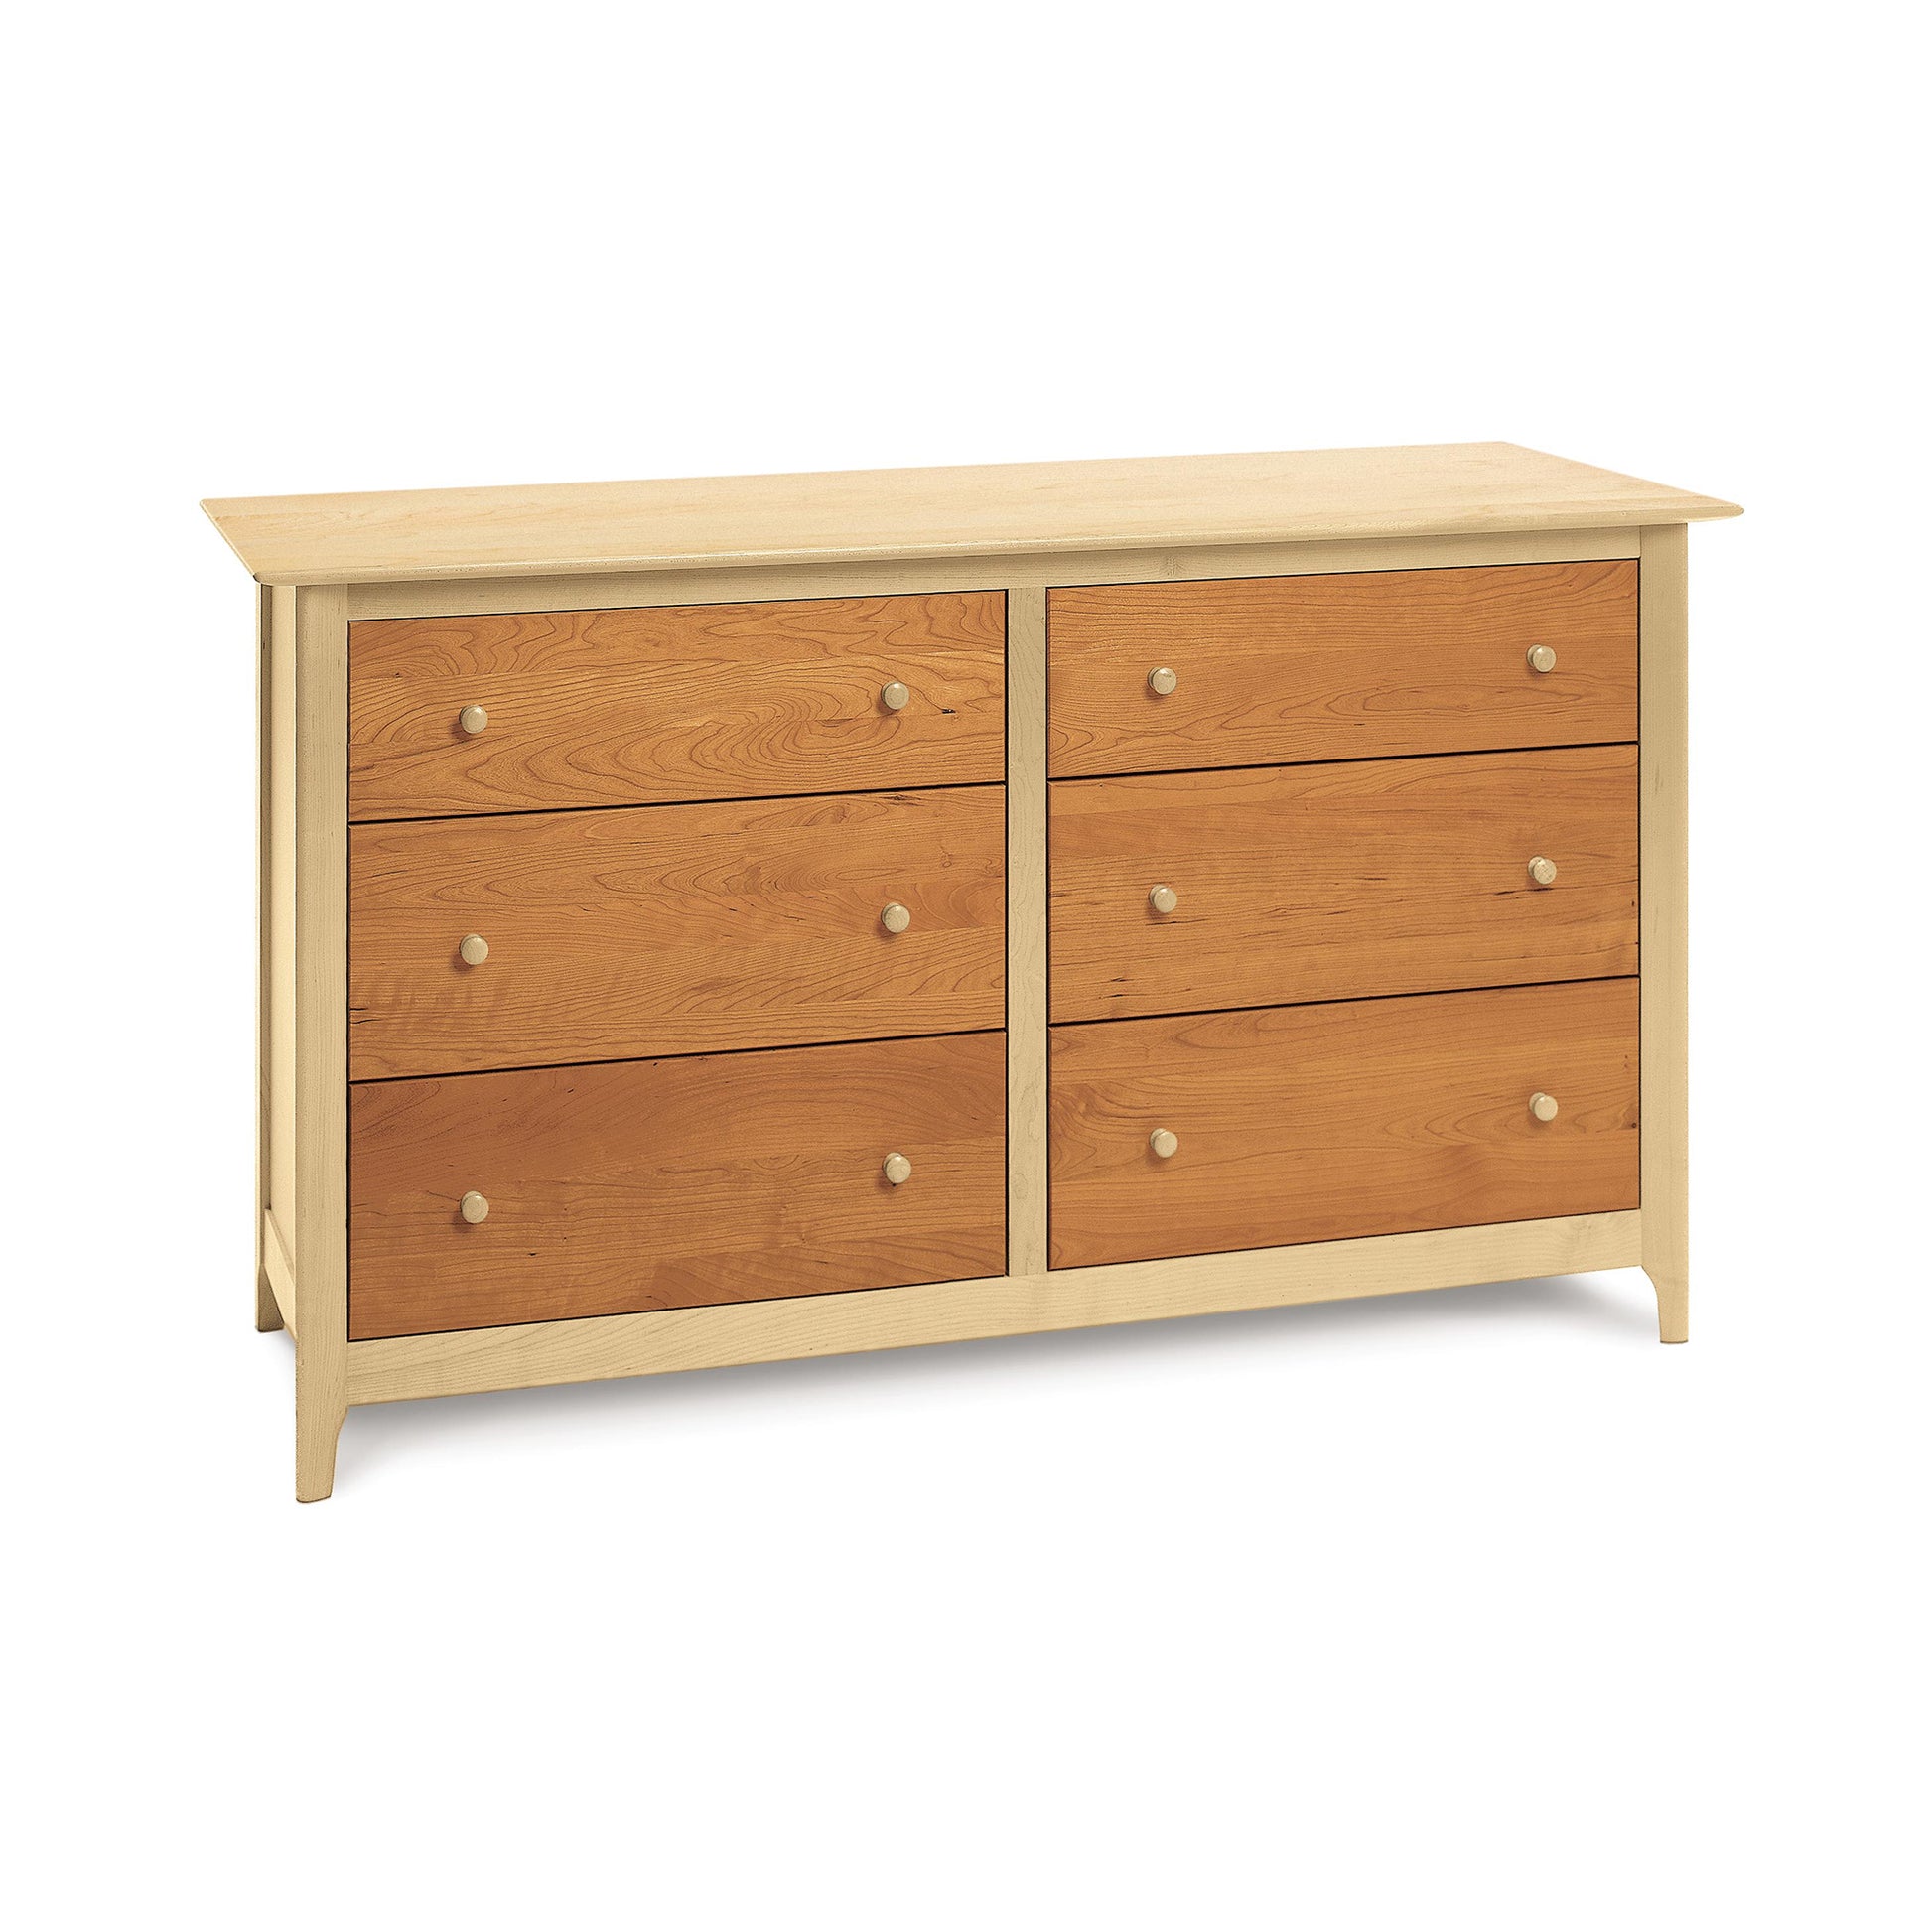 A Sarah 6-Drawer Dresser by Copeland Furniture on a white background.